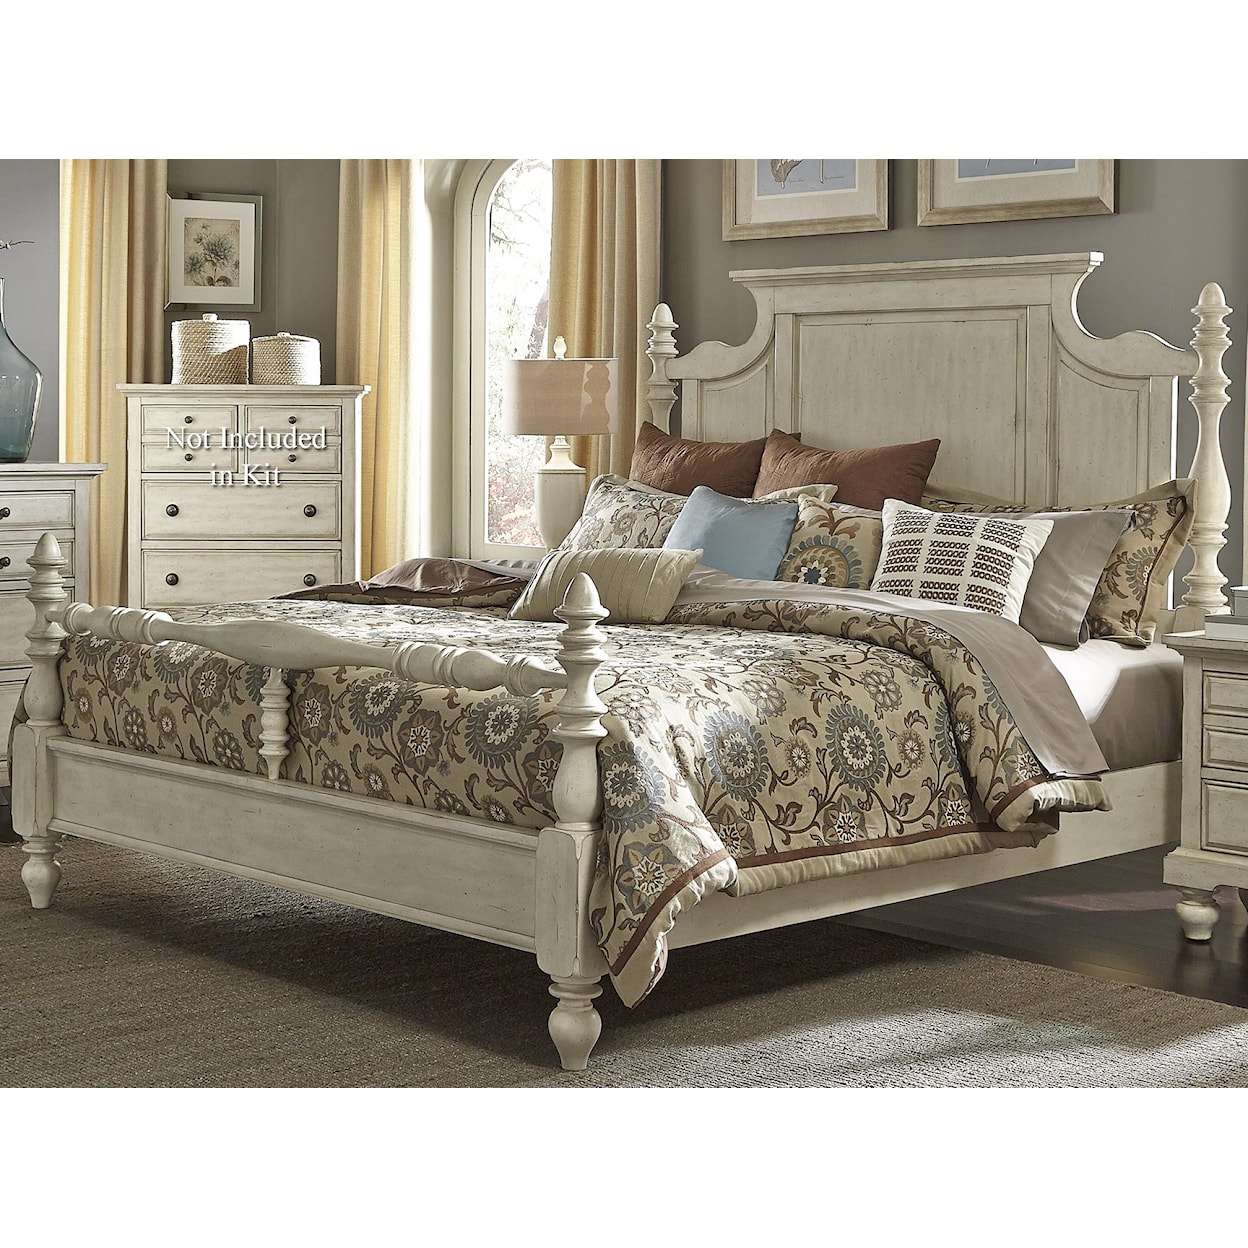 Libby Hanna King Poster Bed